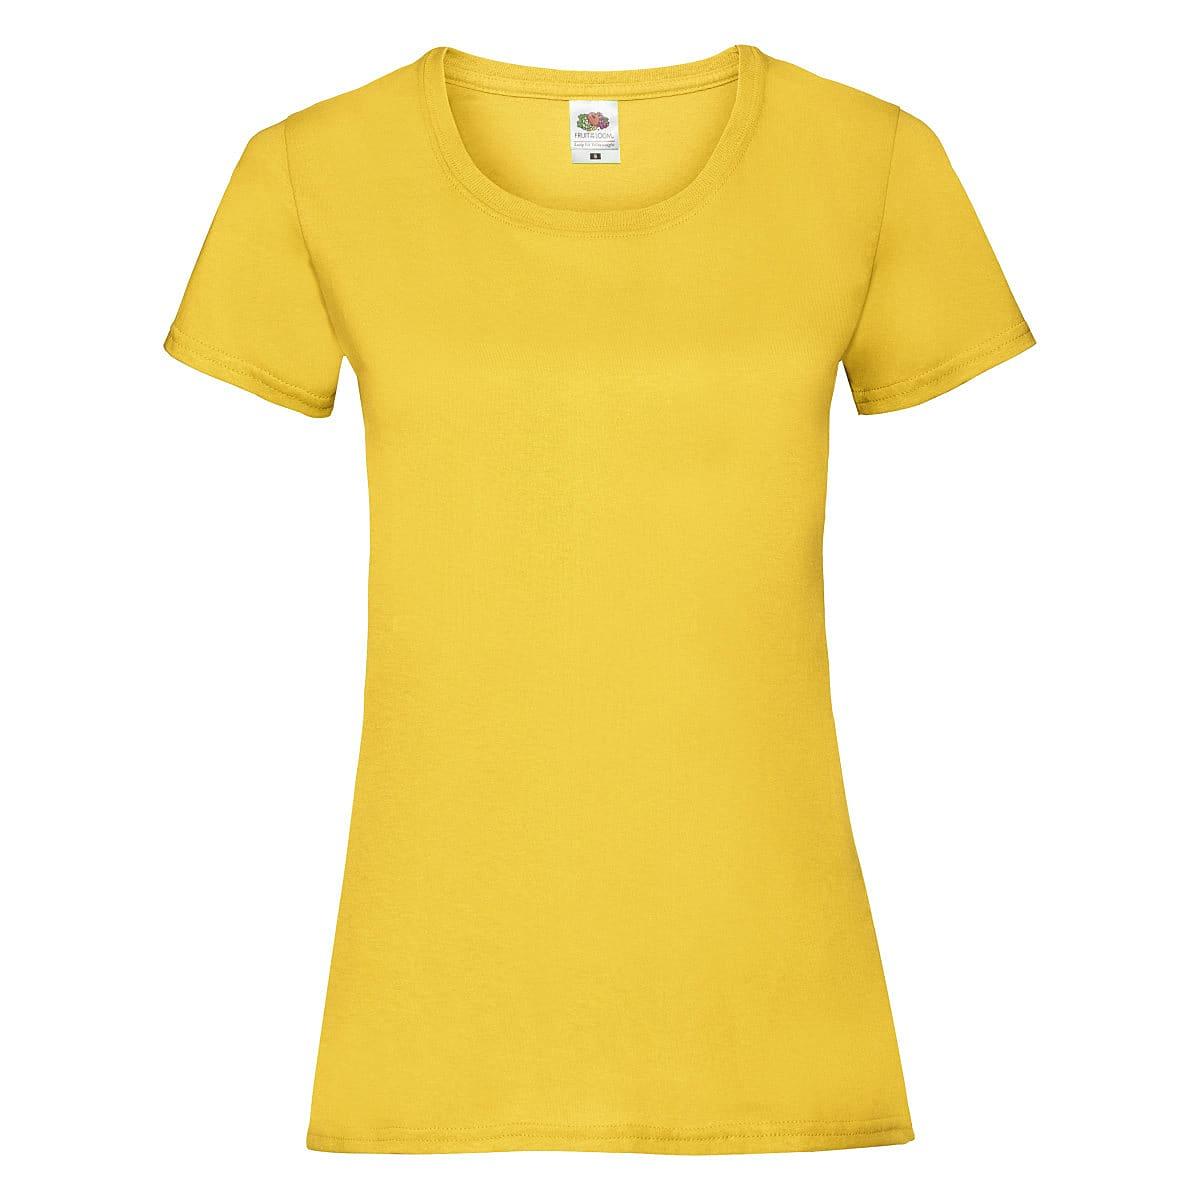 Fruit Of The Loom Lady-Fit Valueweight T-Shirt in Sunflower (Product Code: 61372)